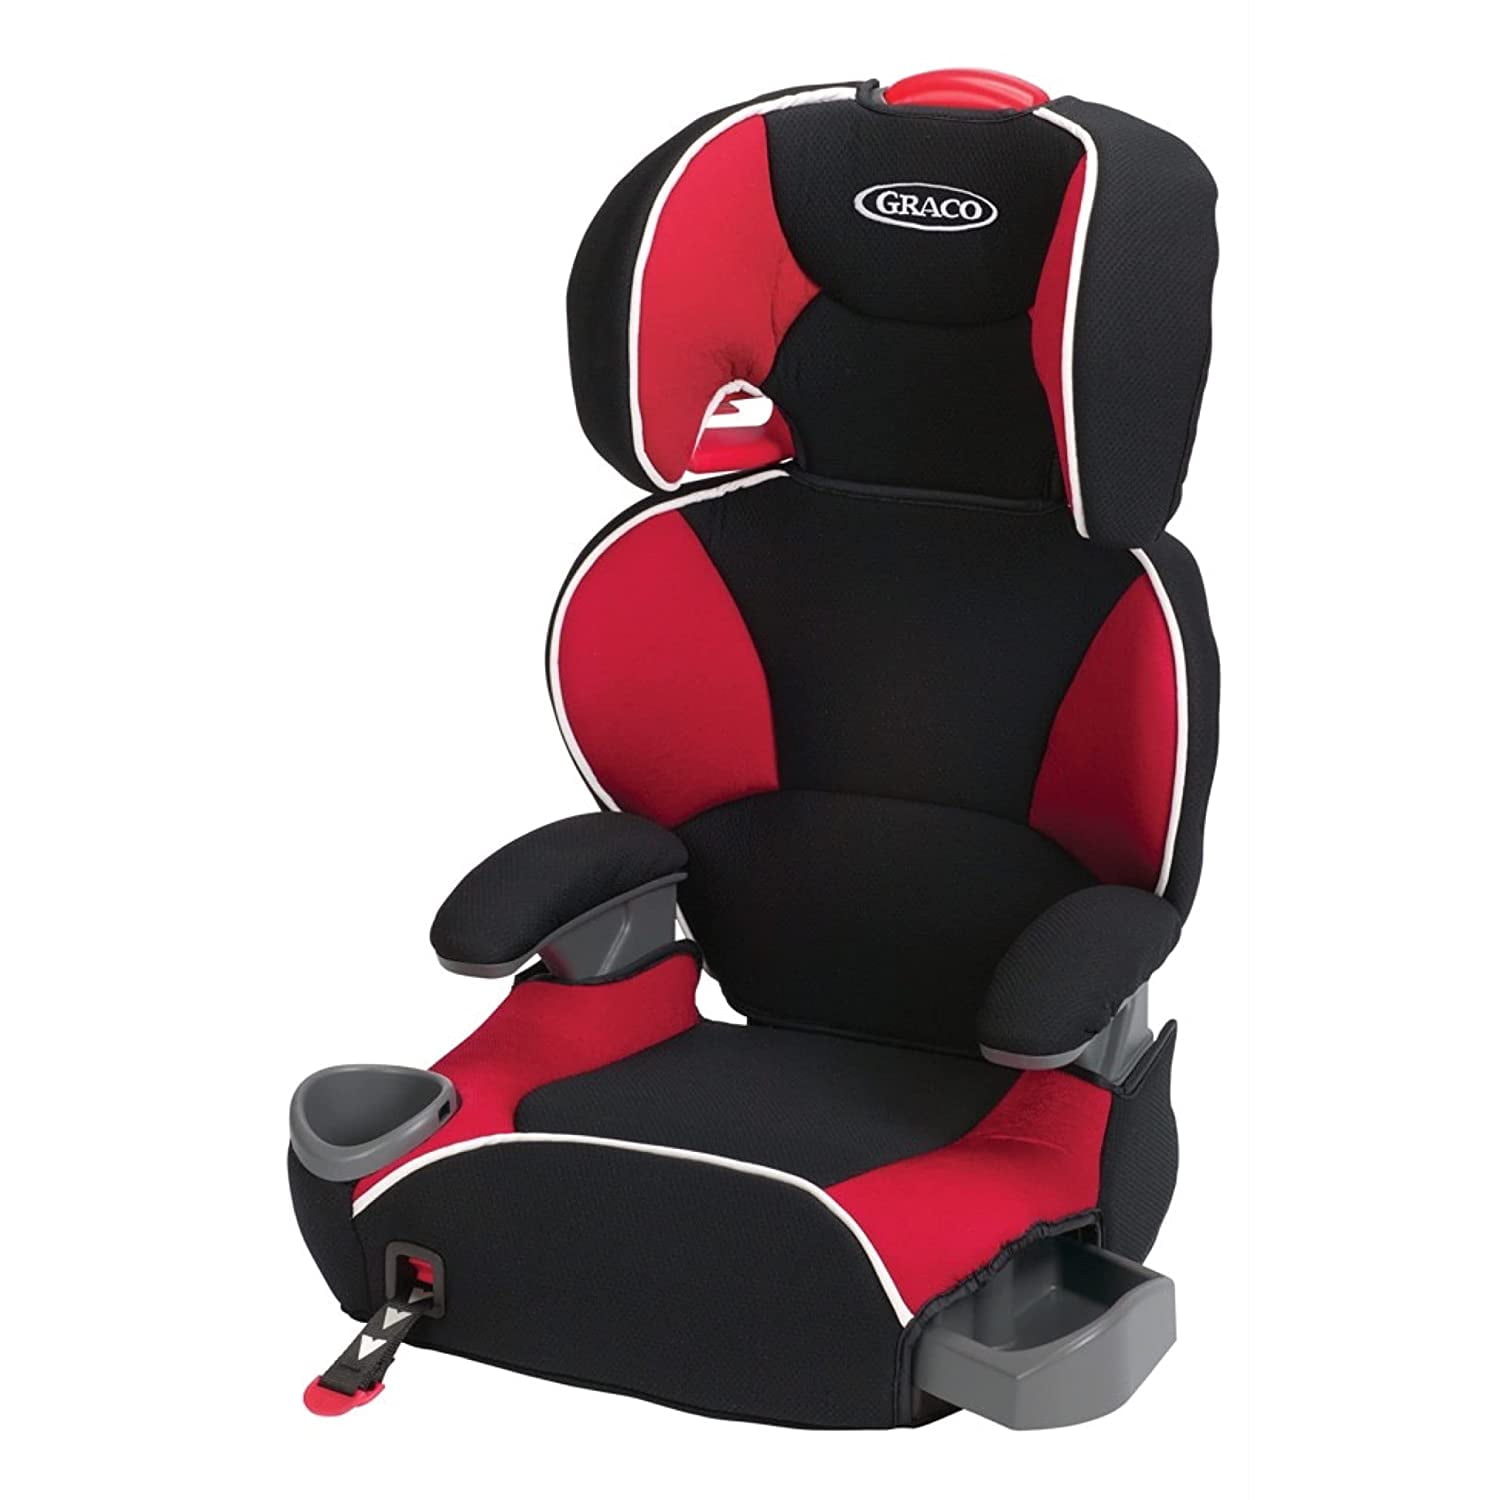 High back booster car seats don't sit flush against the seat back